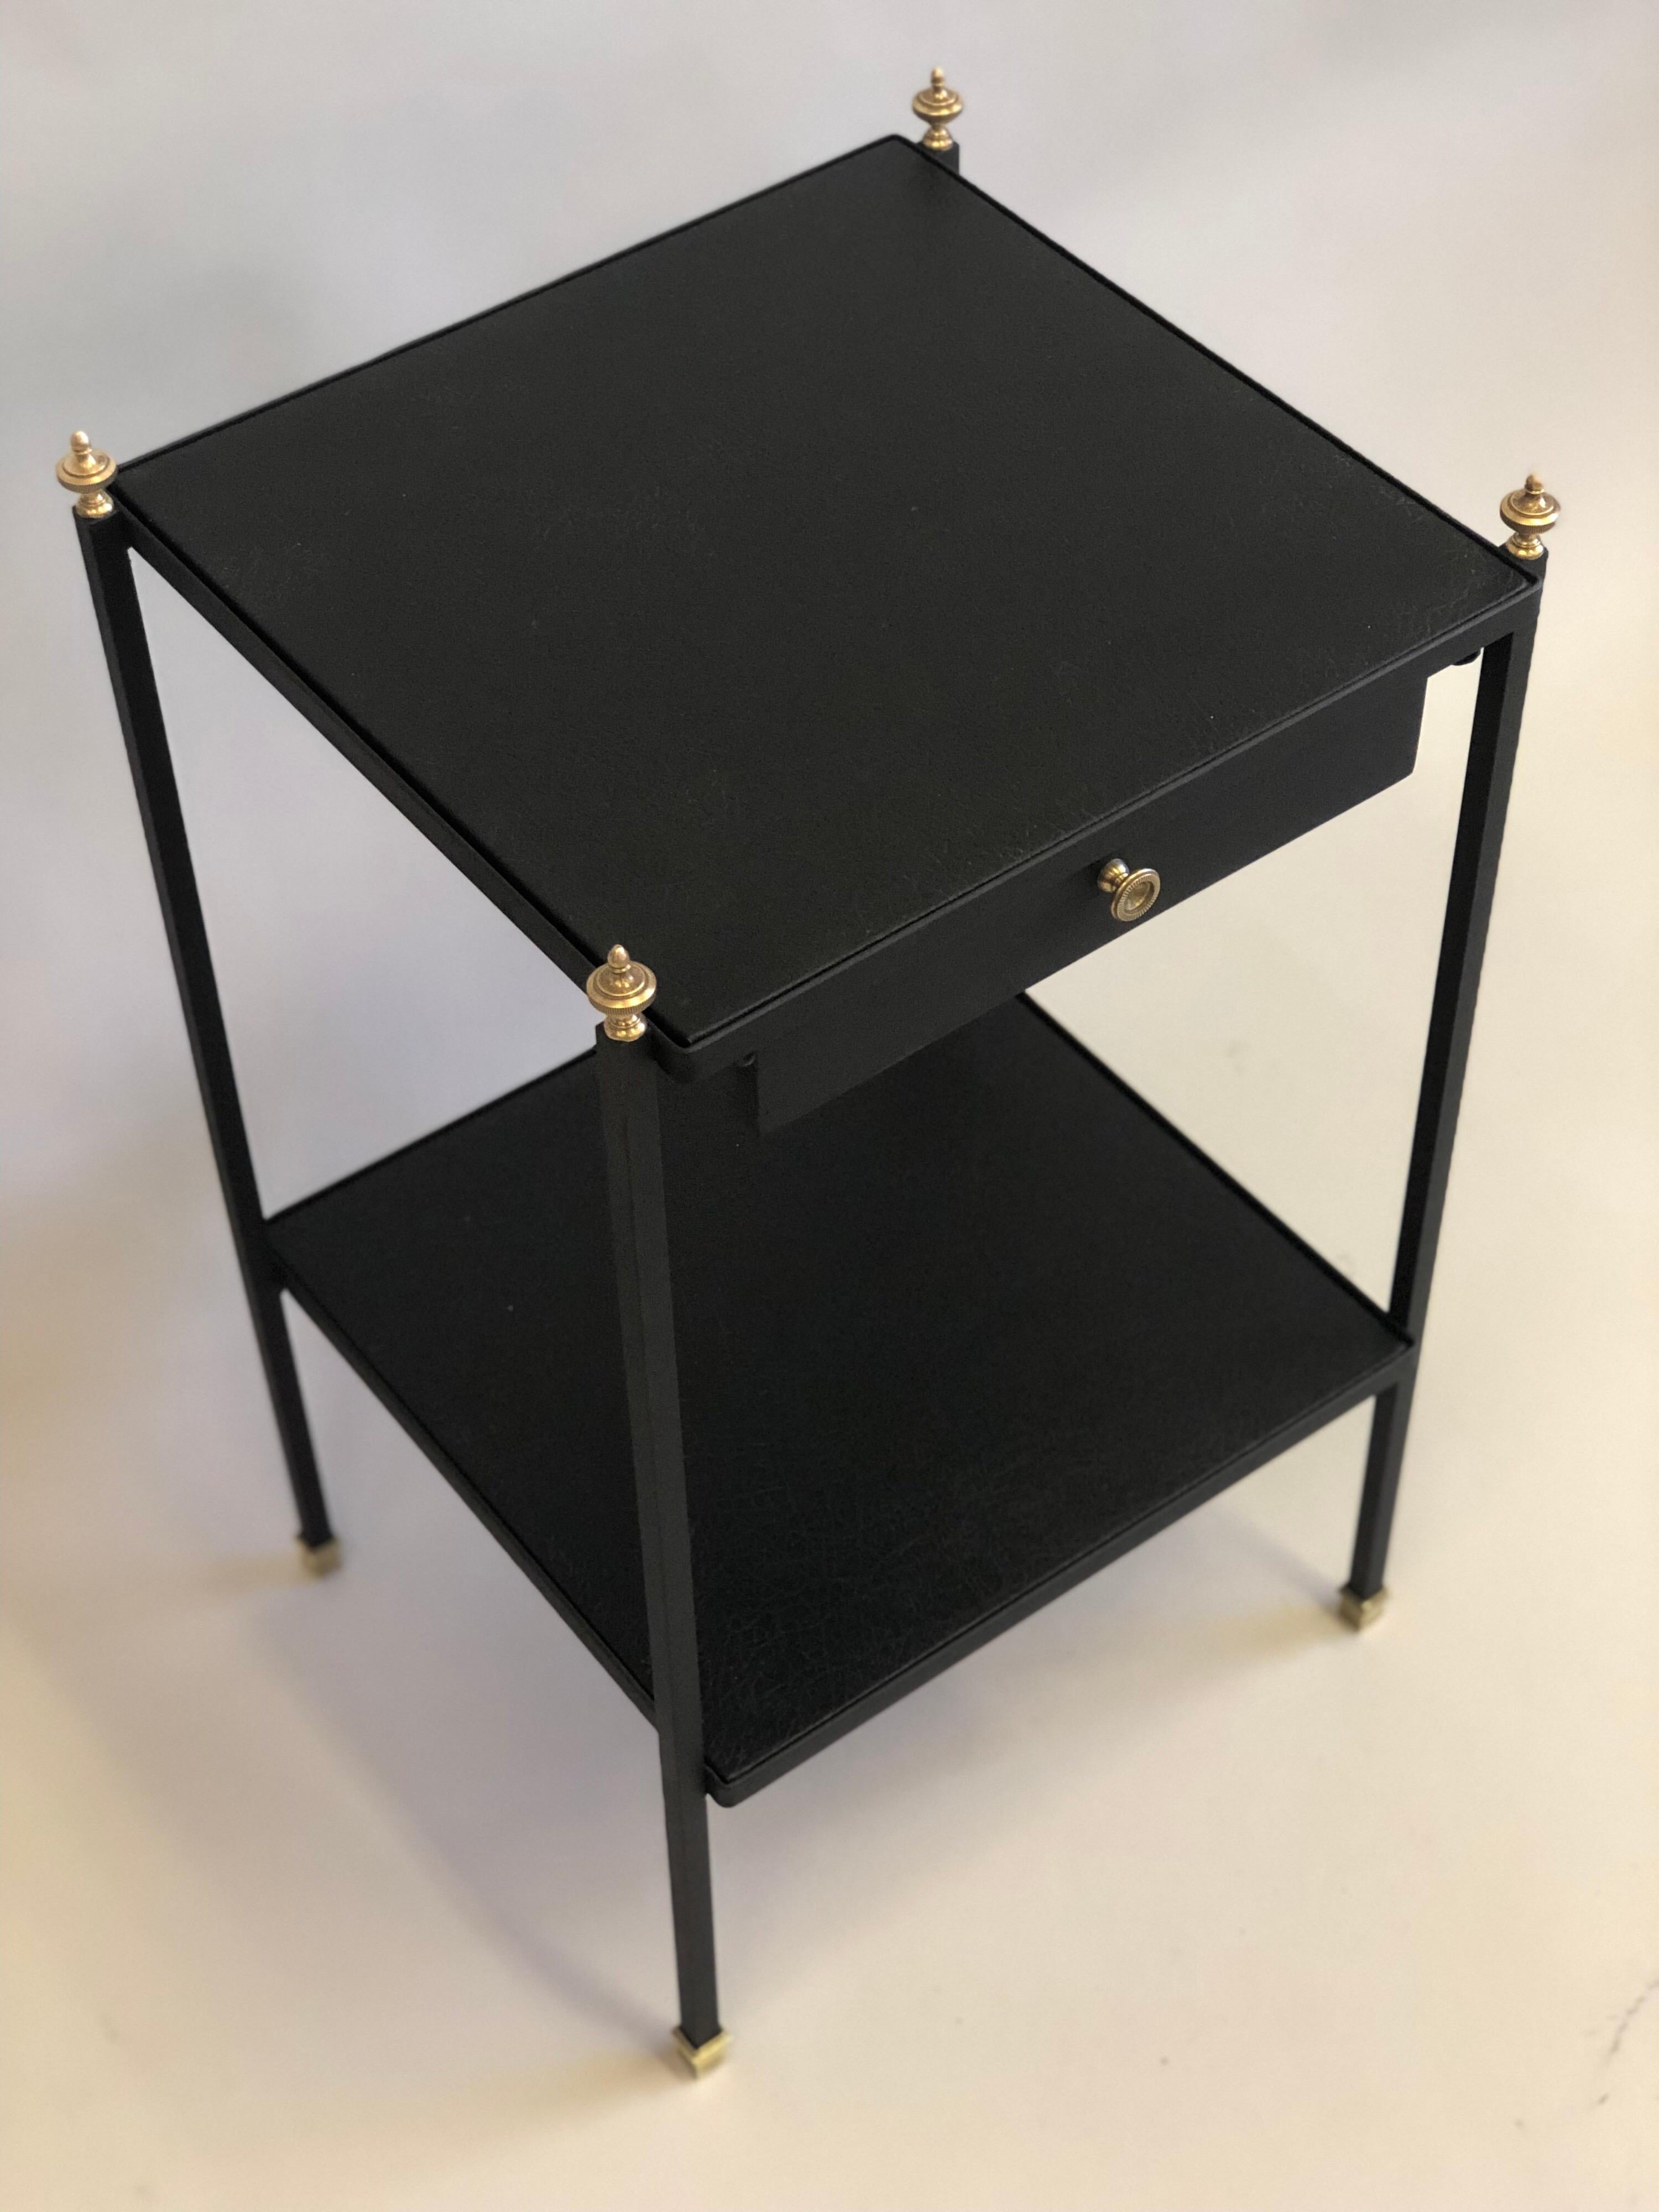 20th Century French Modern Neoclassical Iron & Leather Side Table/Nightstand by Jacques Adnet